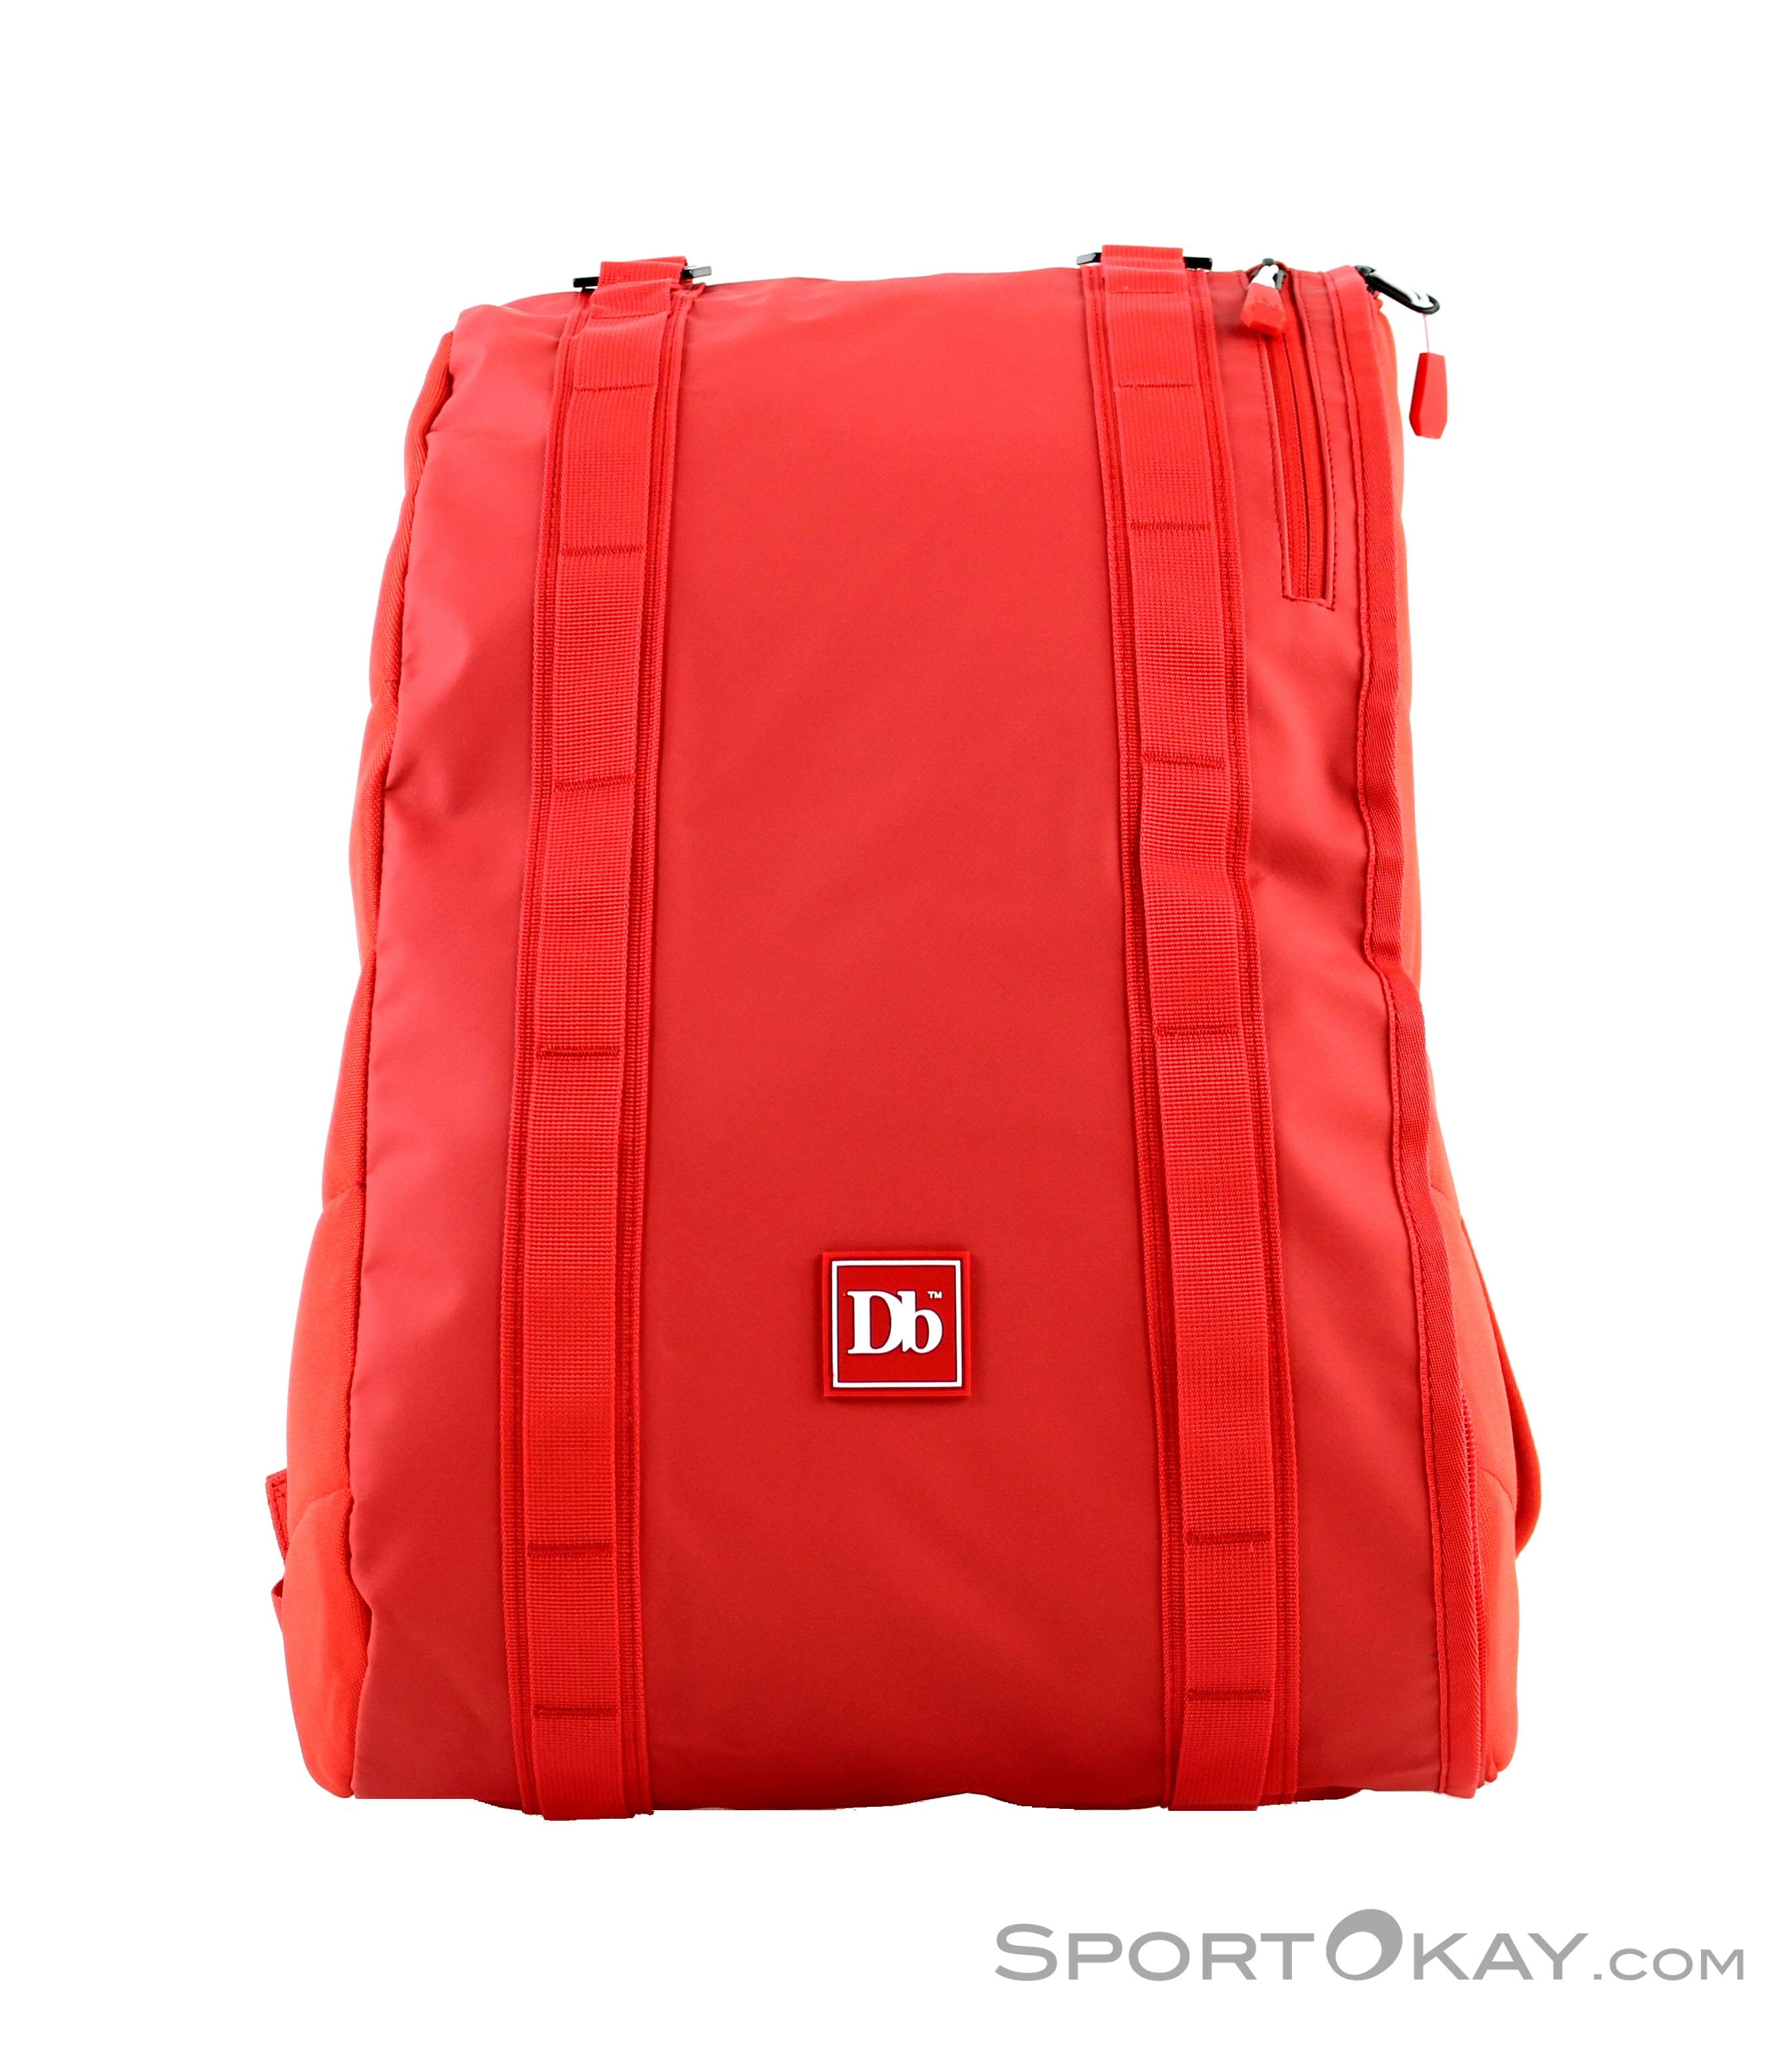 Douchebags The Base l Backpack   Bags   Leisure Bags   Fashion   All